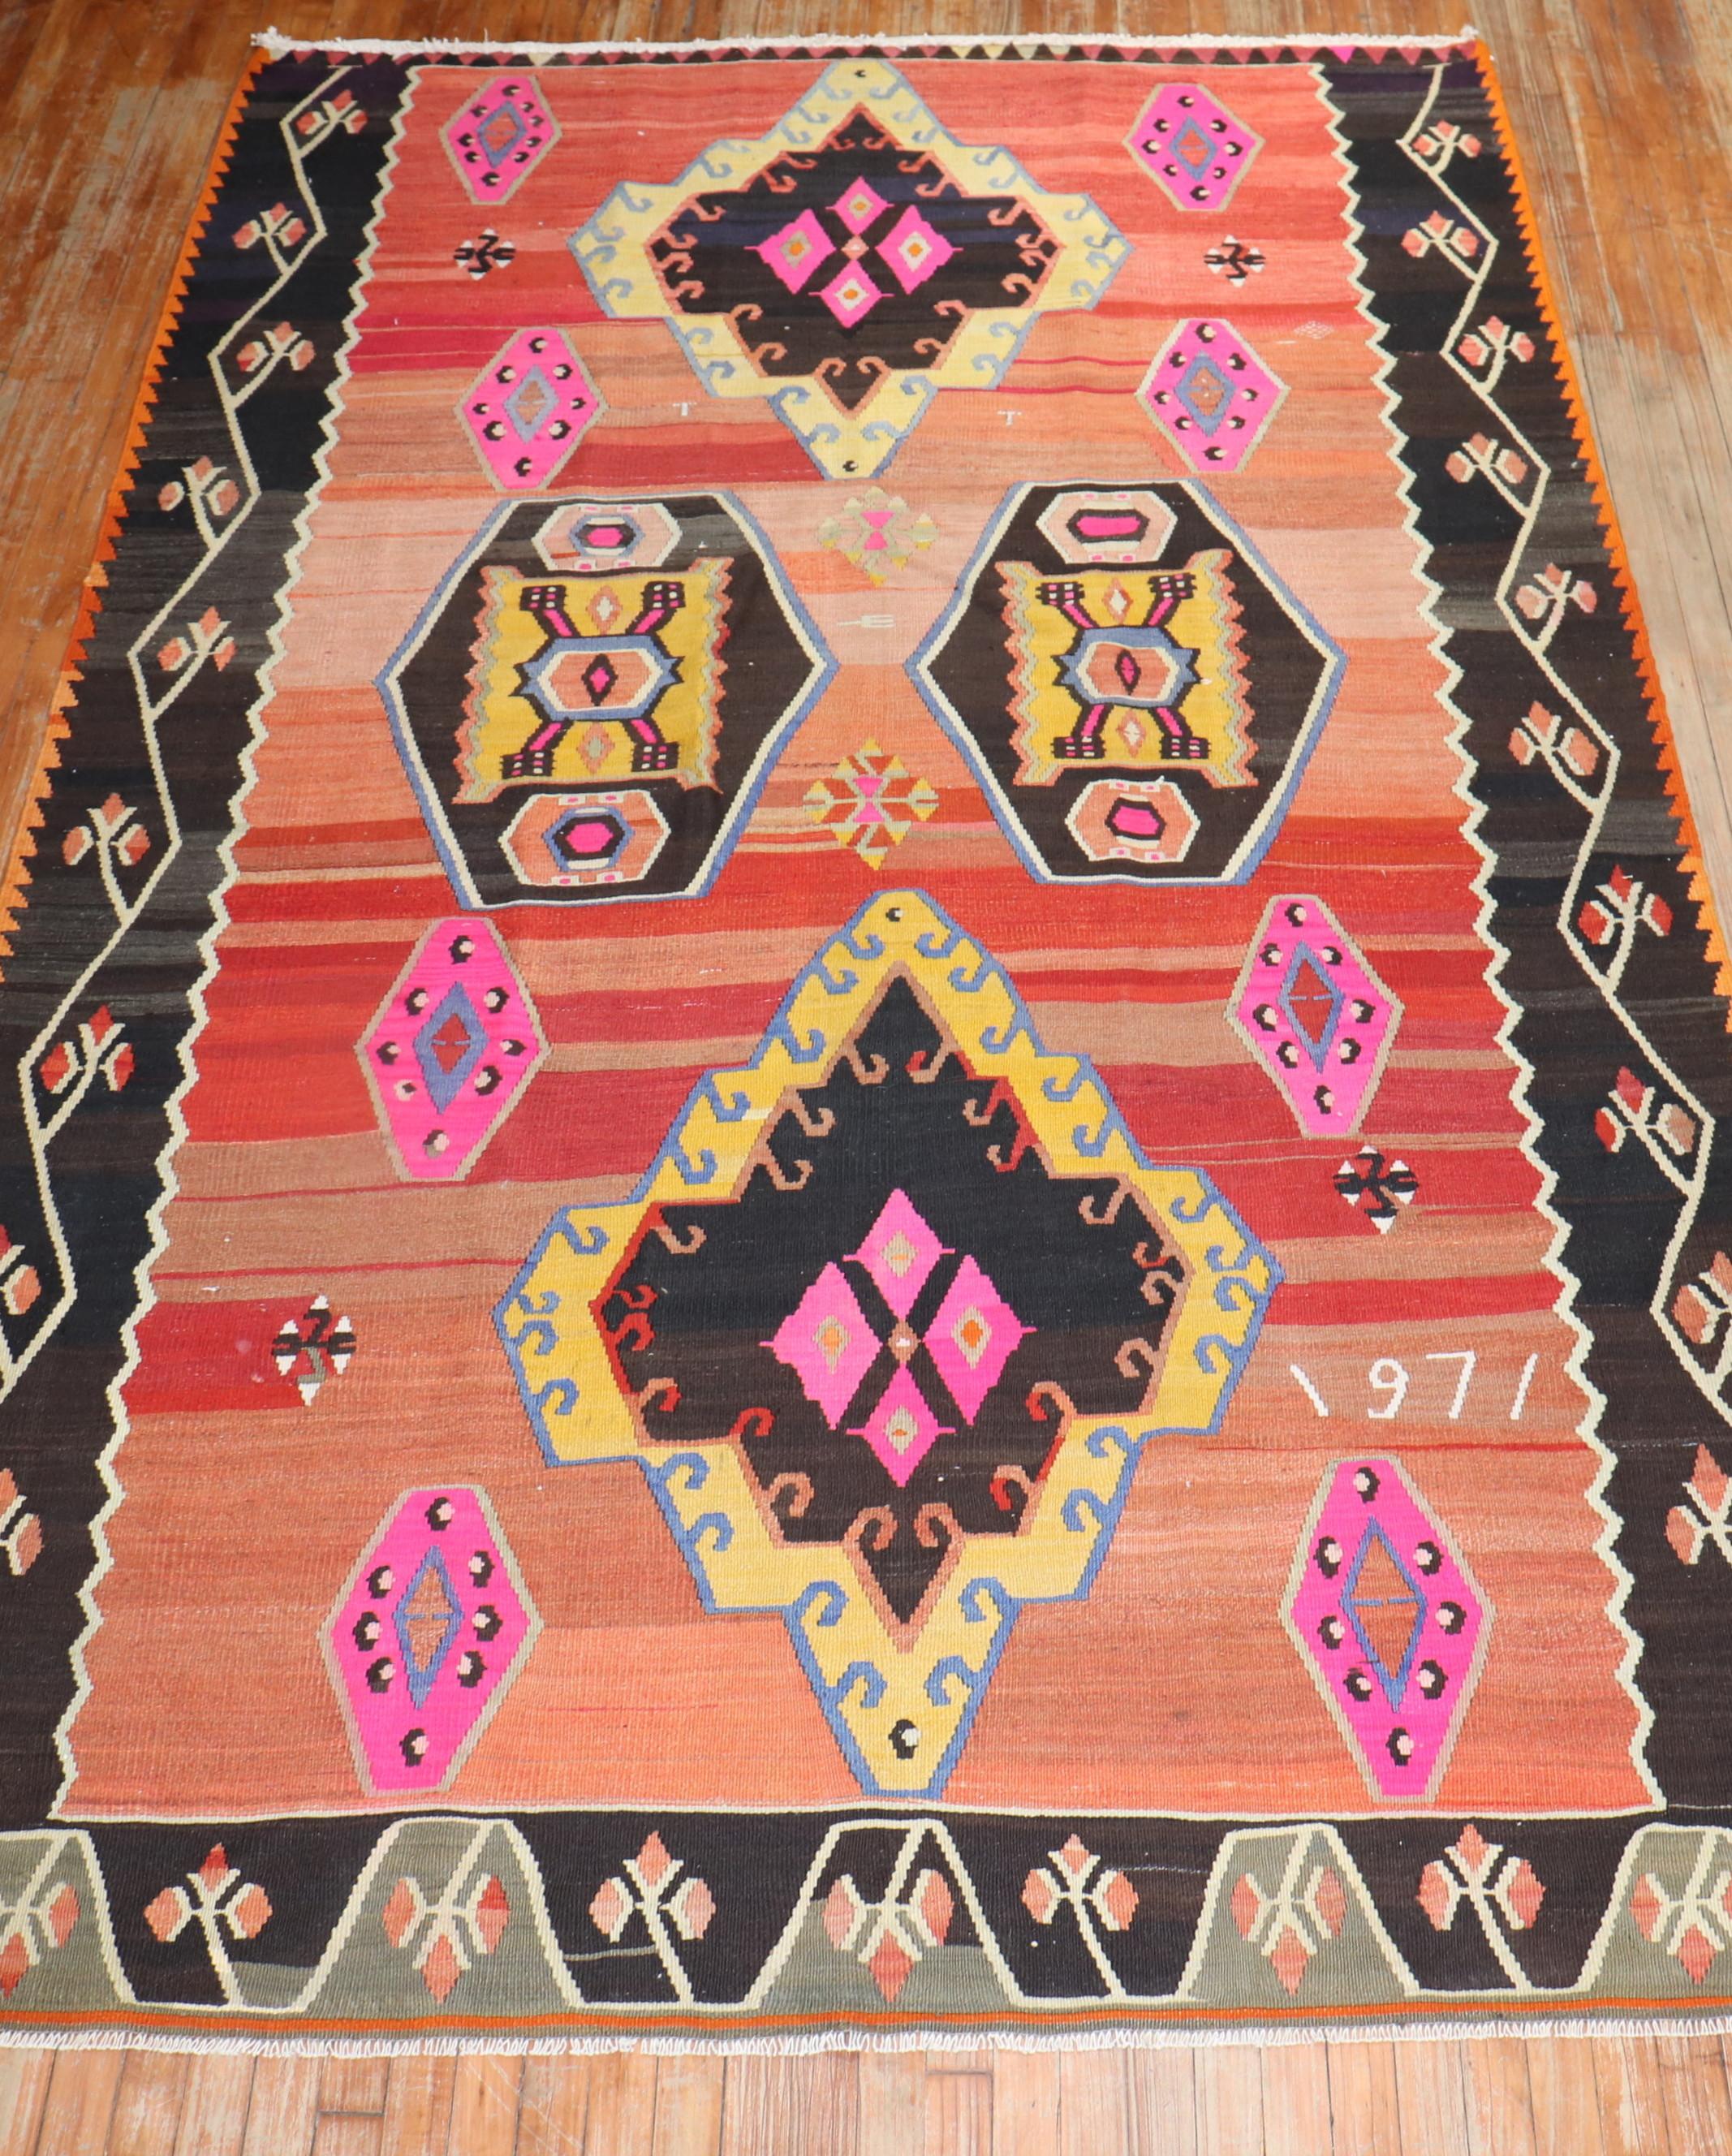 Bohemian Large Scale Small Room Size Turkish Kilim Dated 1971 For Sale